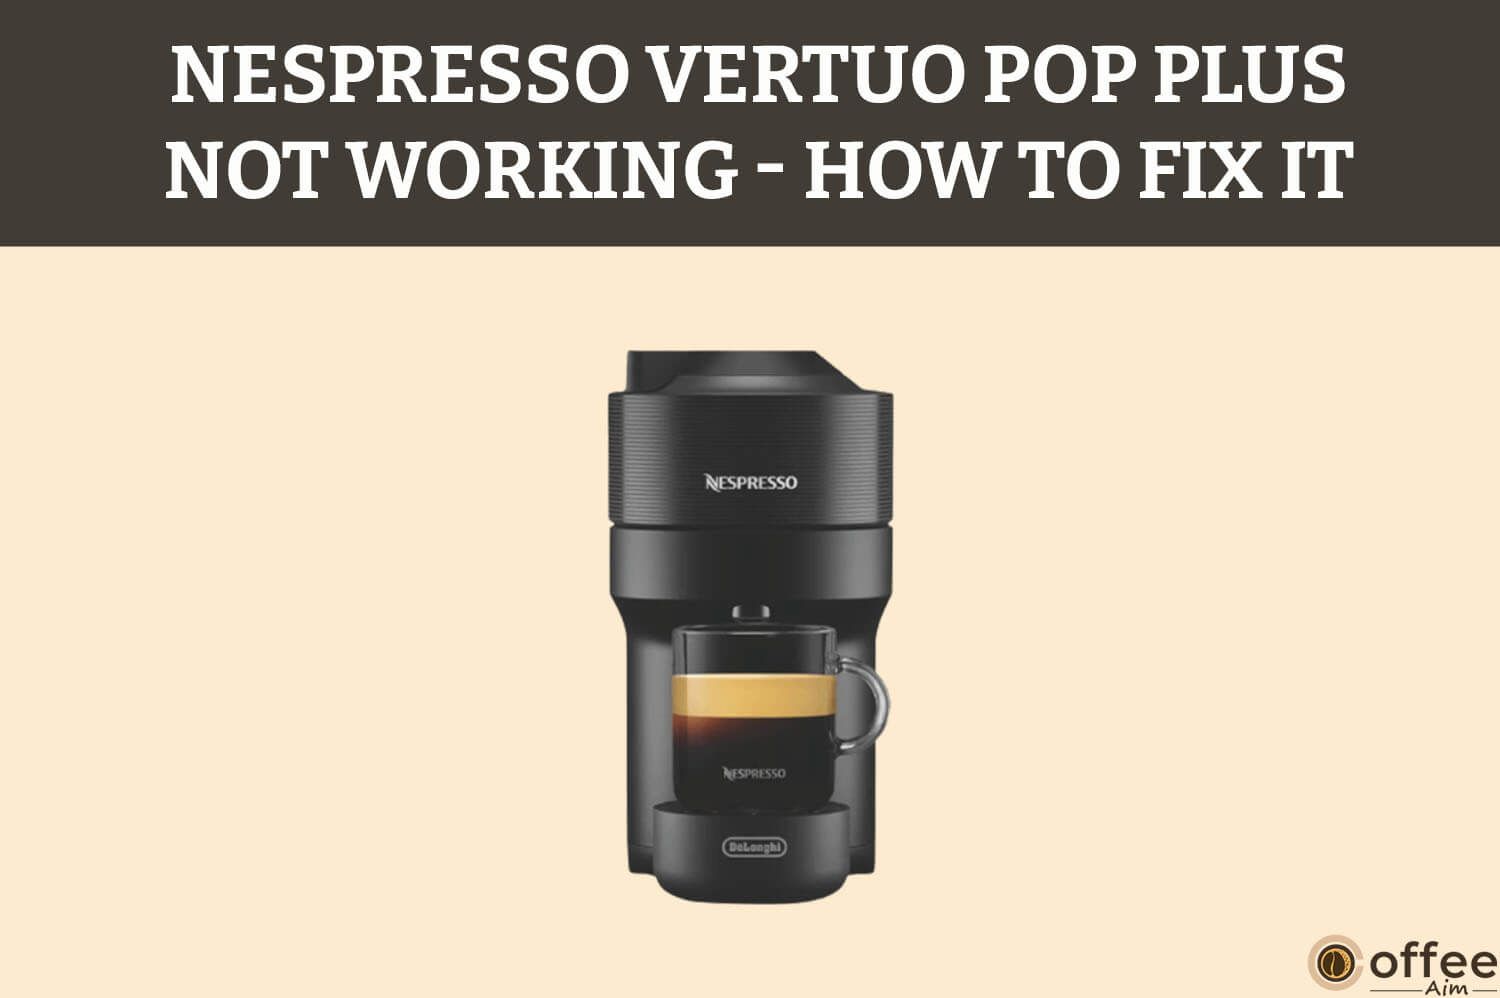 Featured Image for the article "Nespresso Vertuo Pop Plus Not Working How to Fix It"